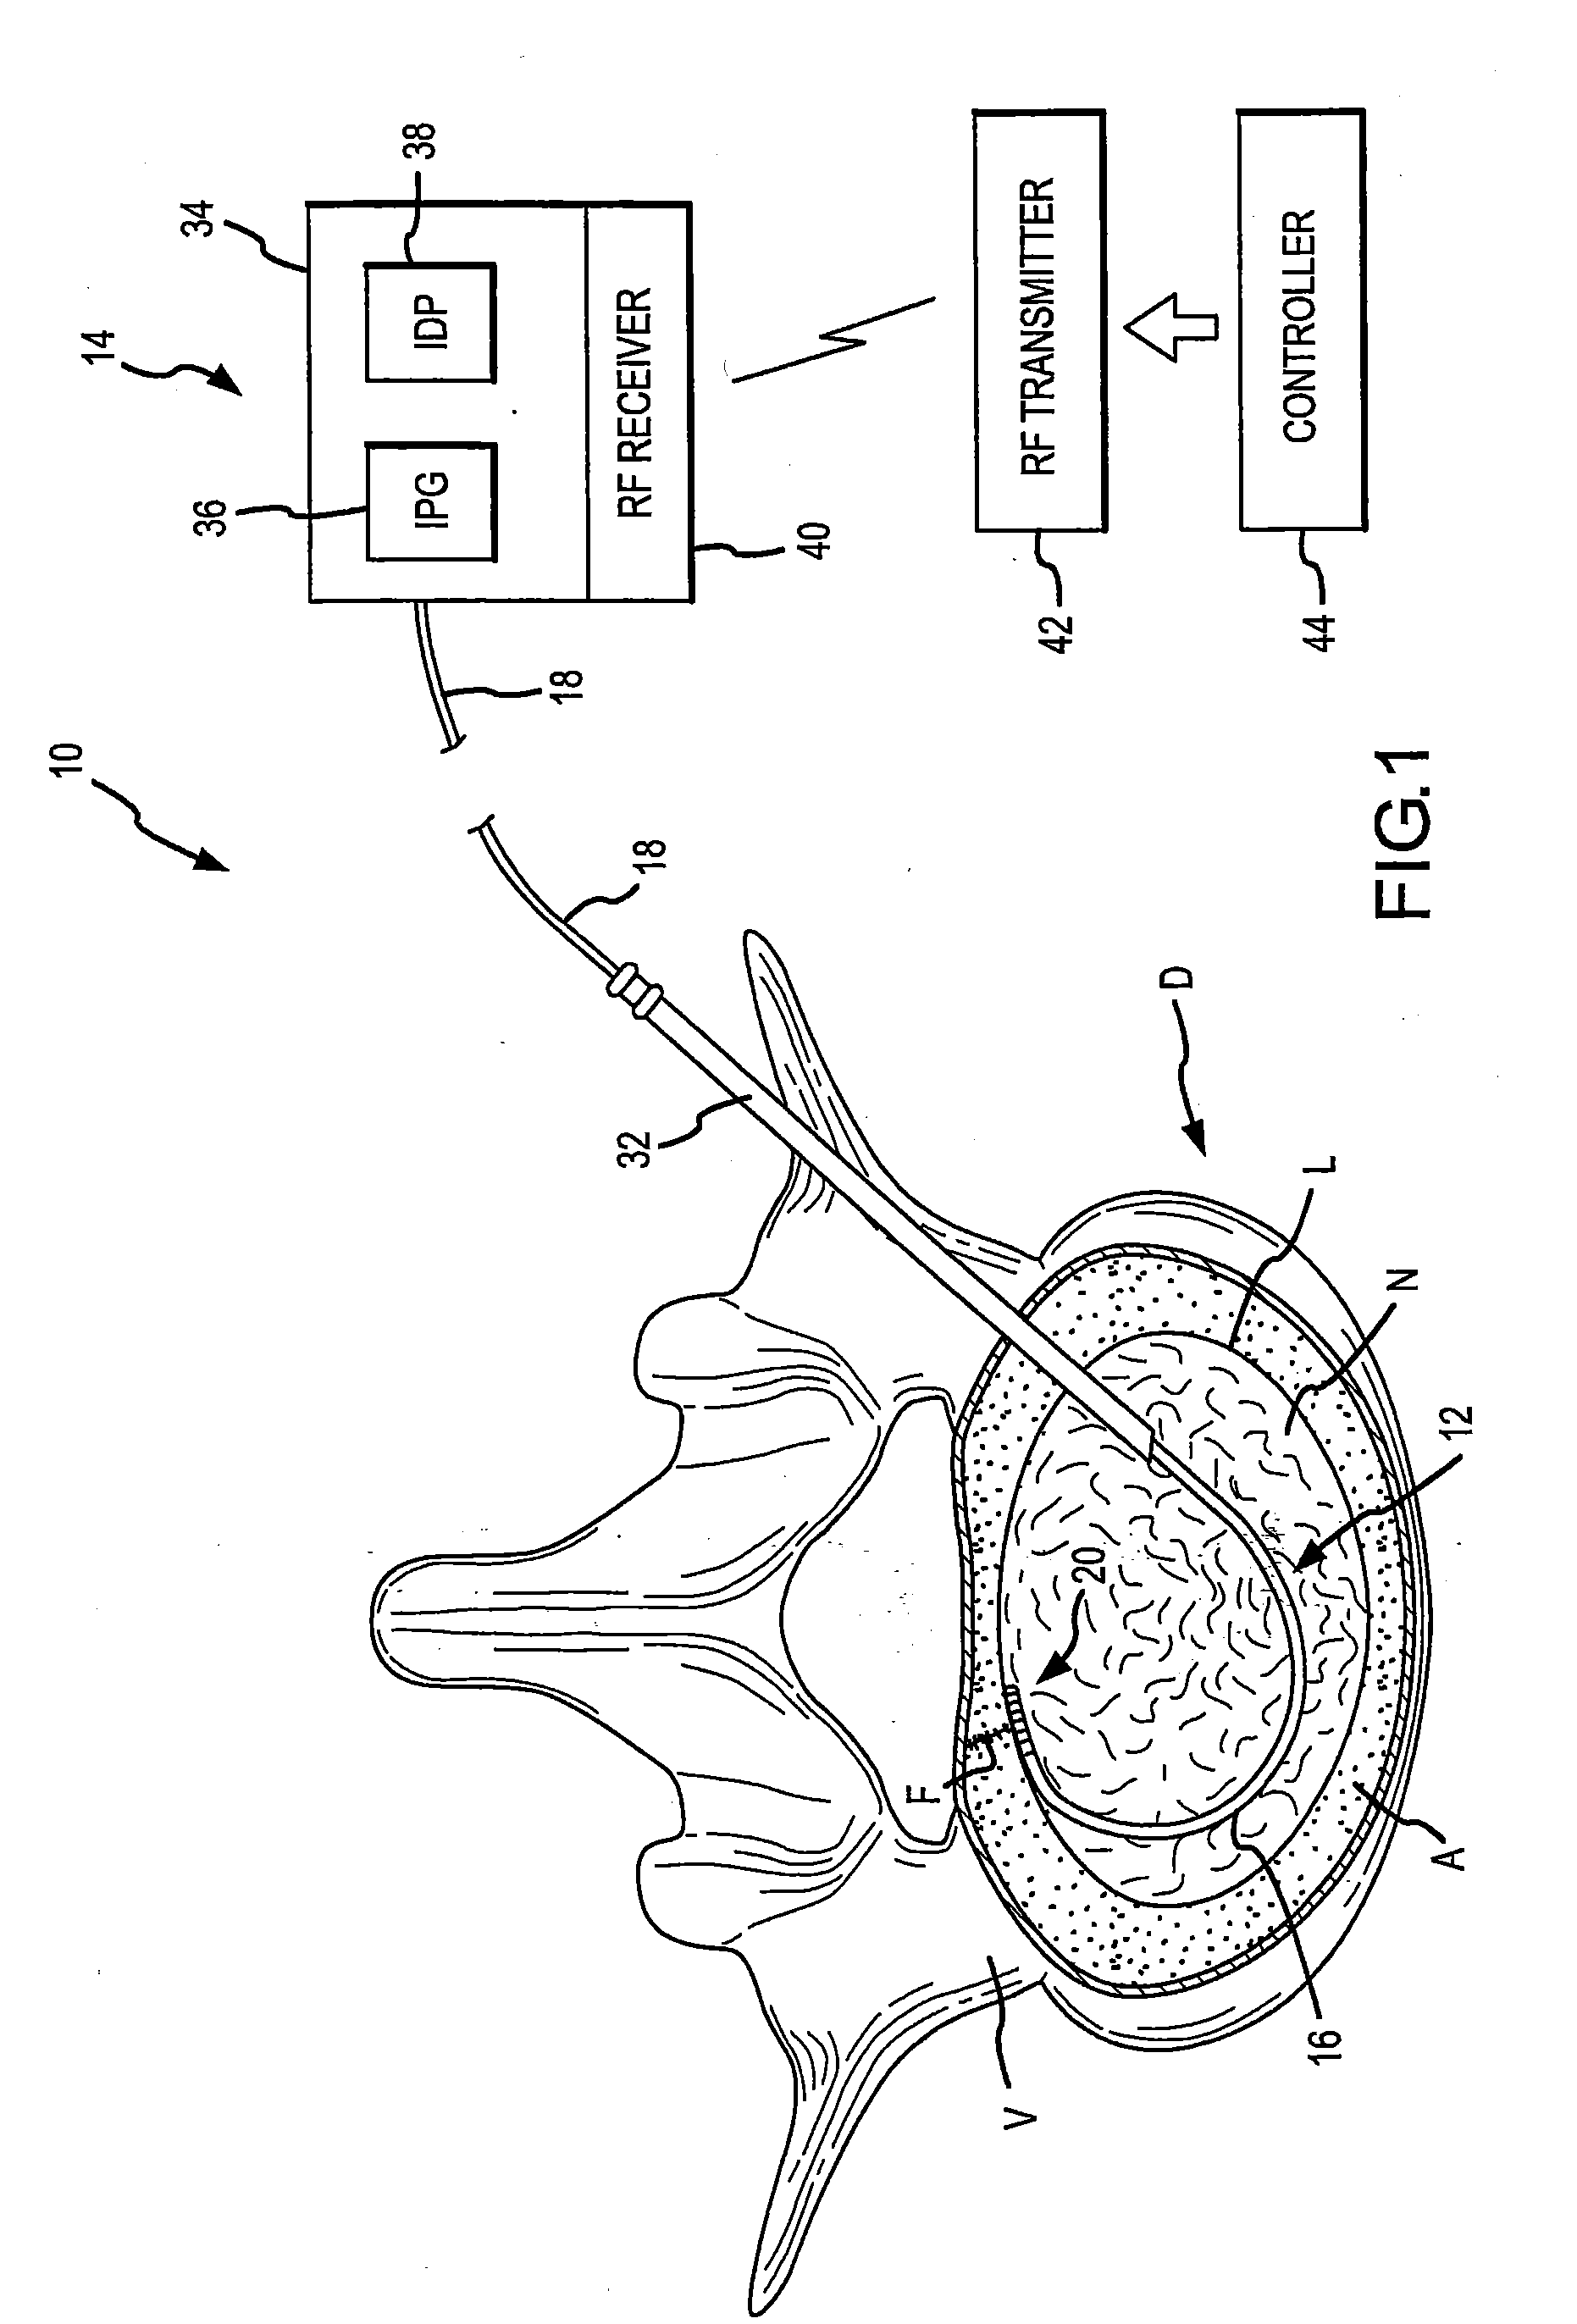 Combination electrical stimulating and infusion device and method